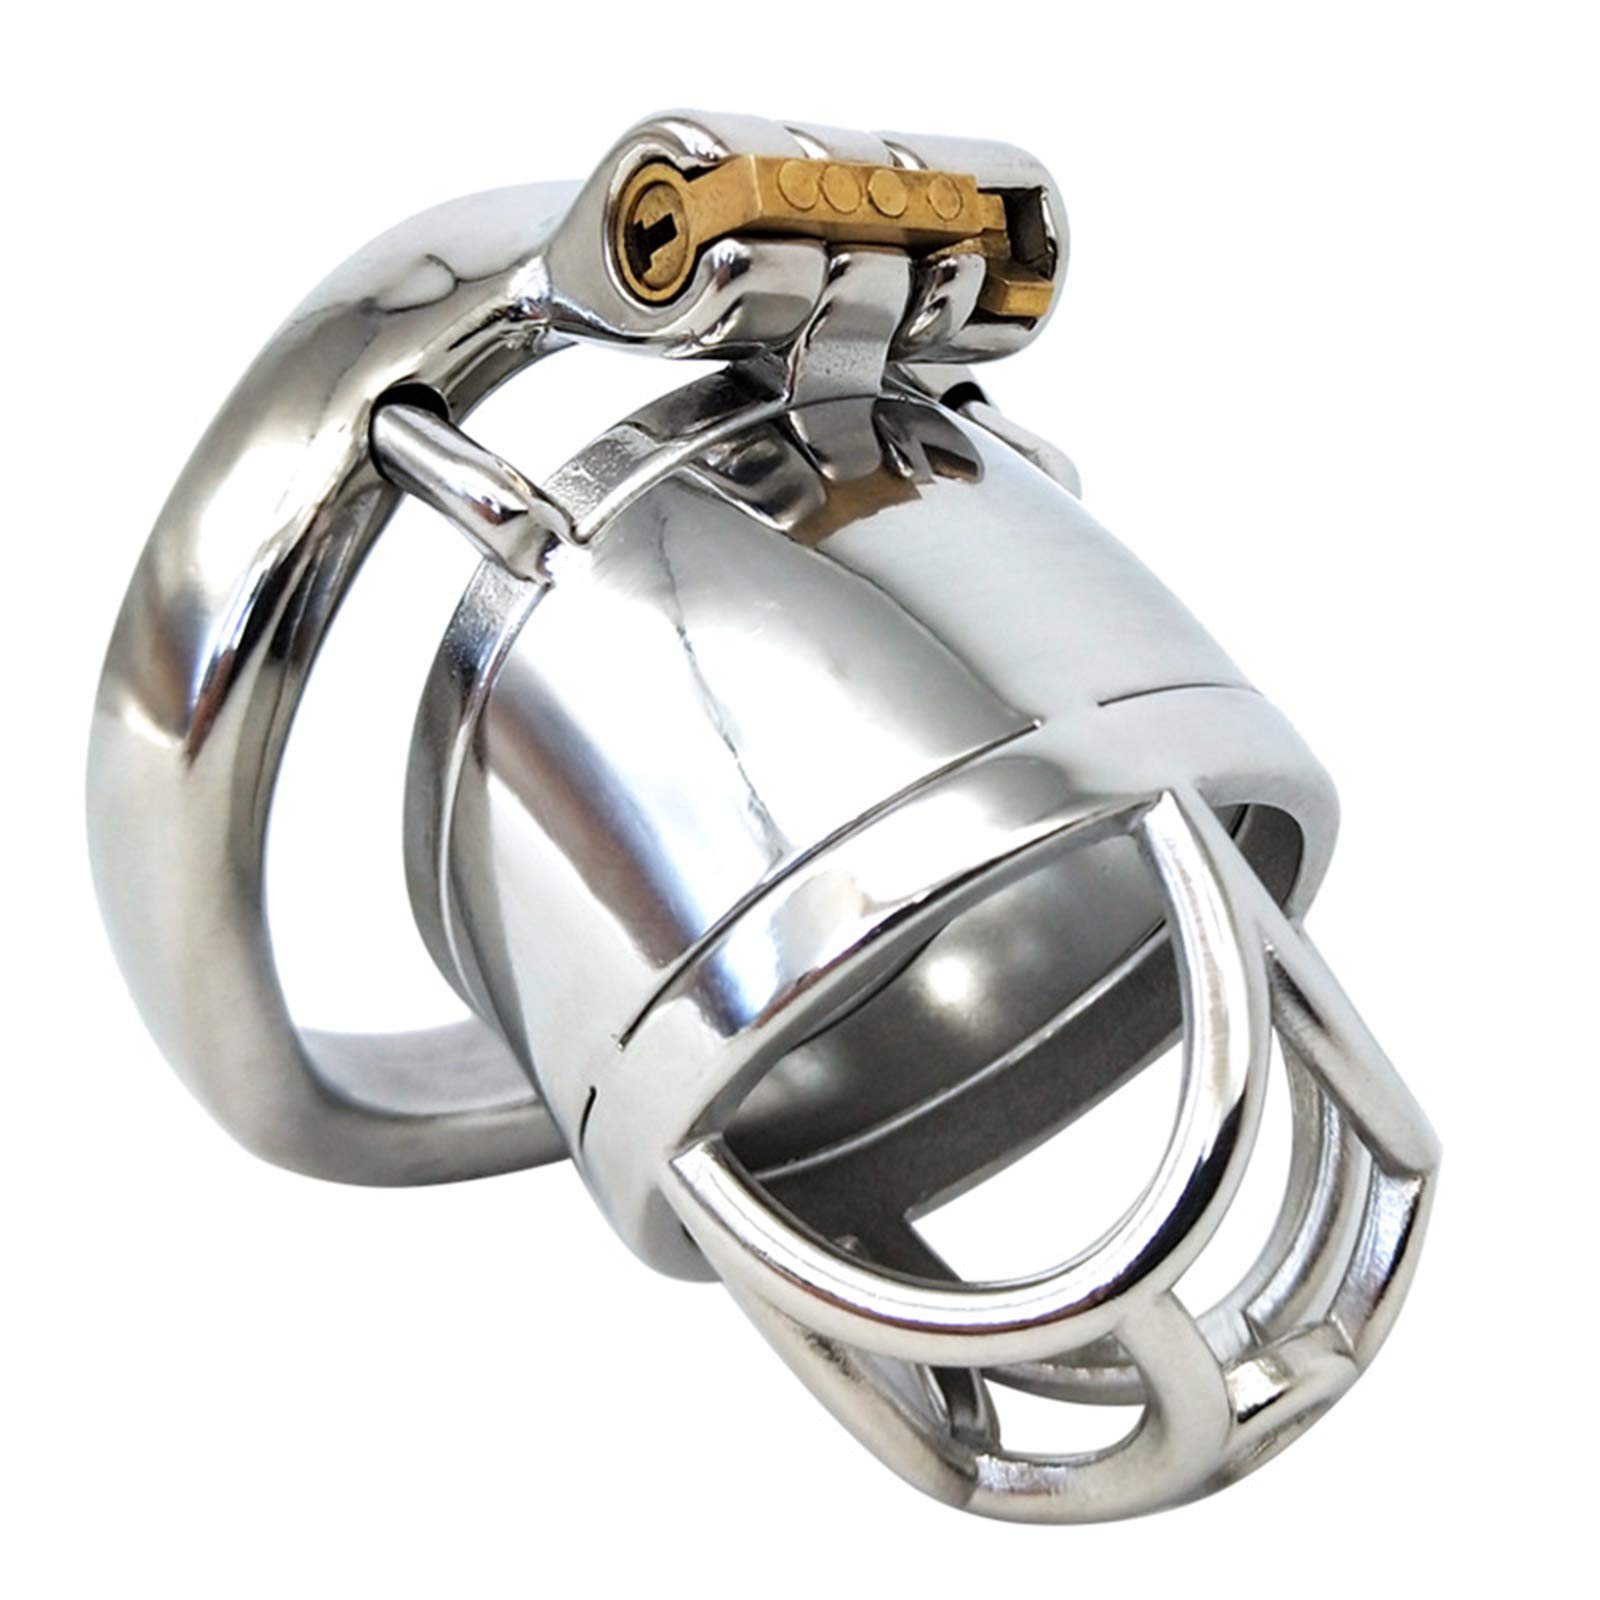 Peniskäfig Keuschheitskäfig Chastity Cage Steel Cock Cage Male Chastity Device,50mm